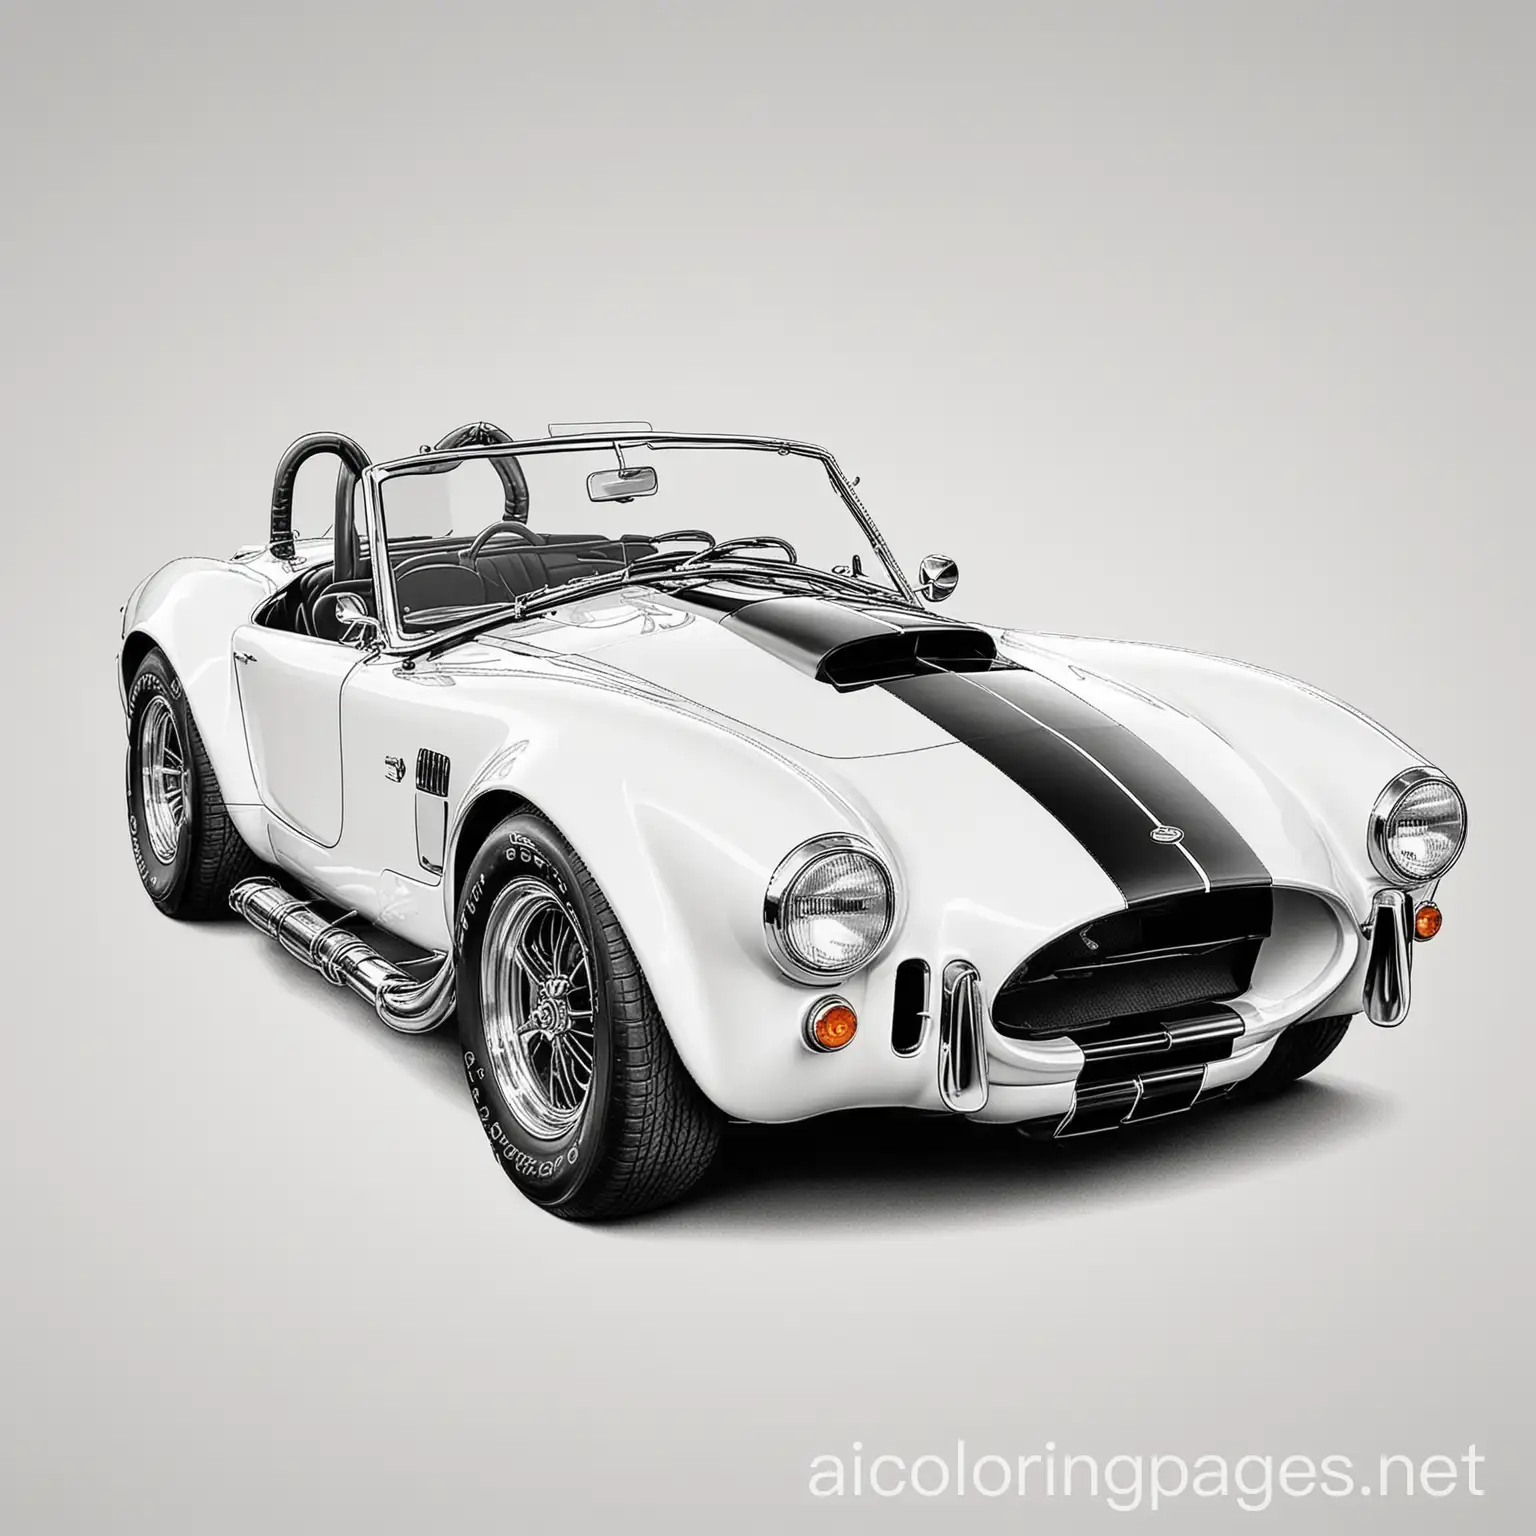 Classic-1965-Ford-Cobra-Coloring-Page-Vintage-Car-Line-Art-on-White-Background